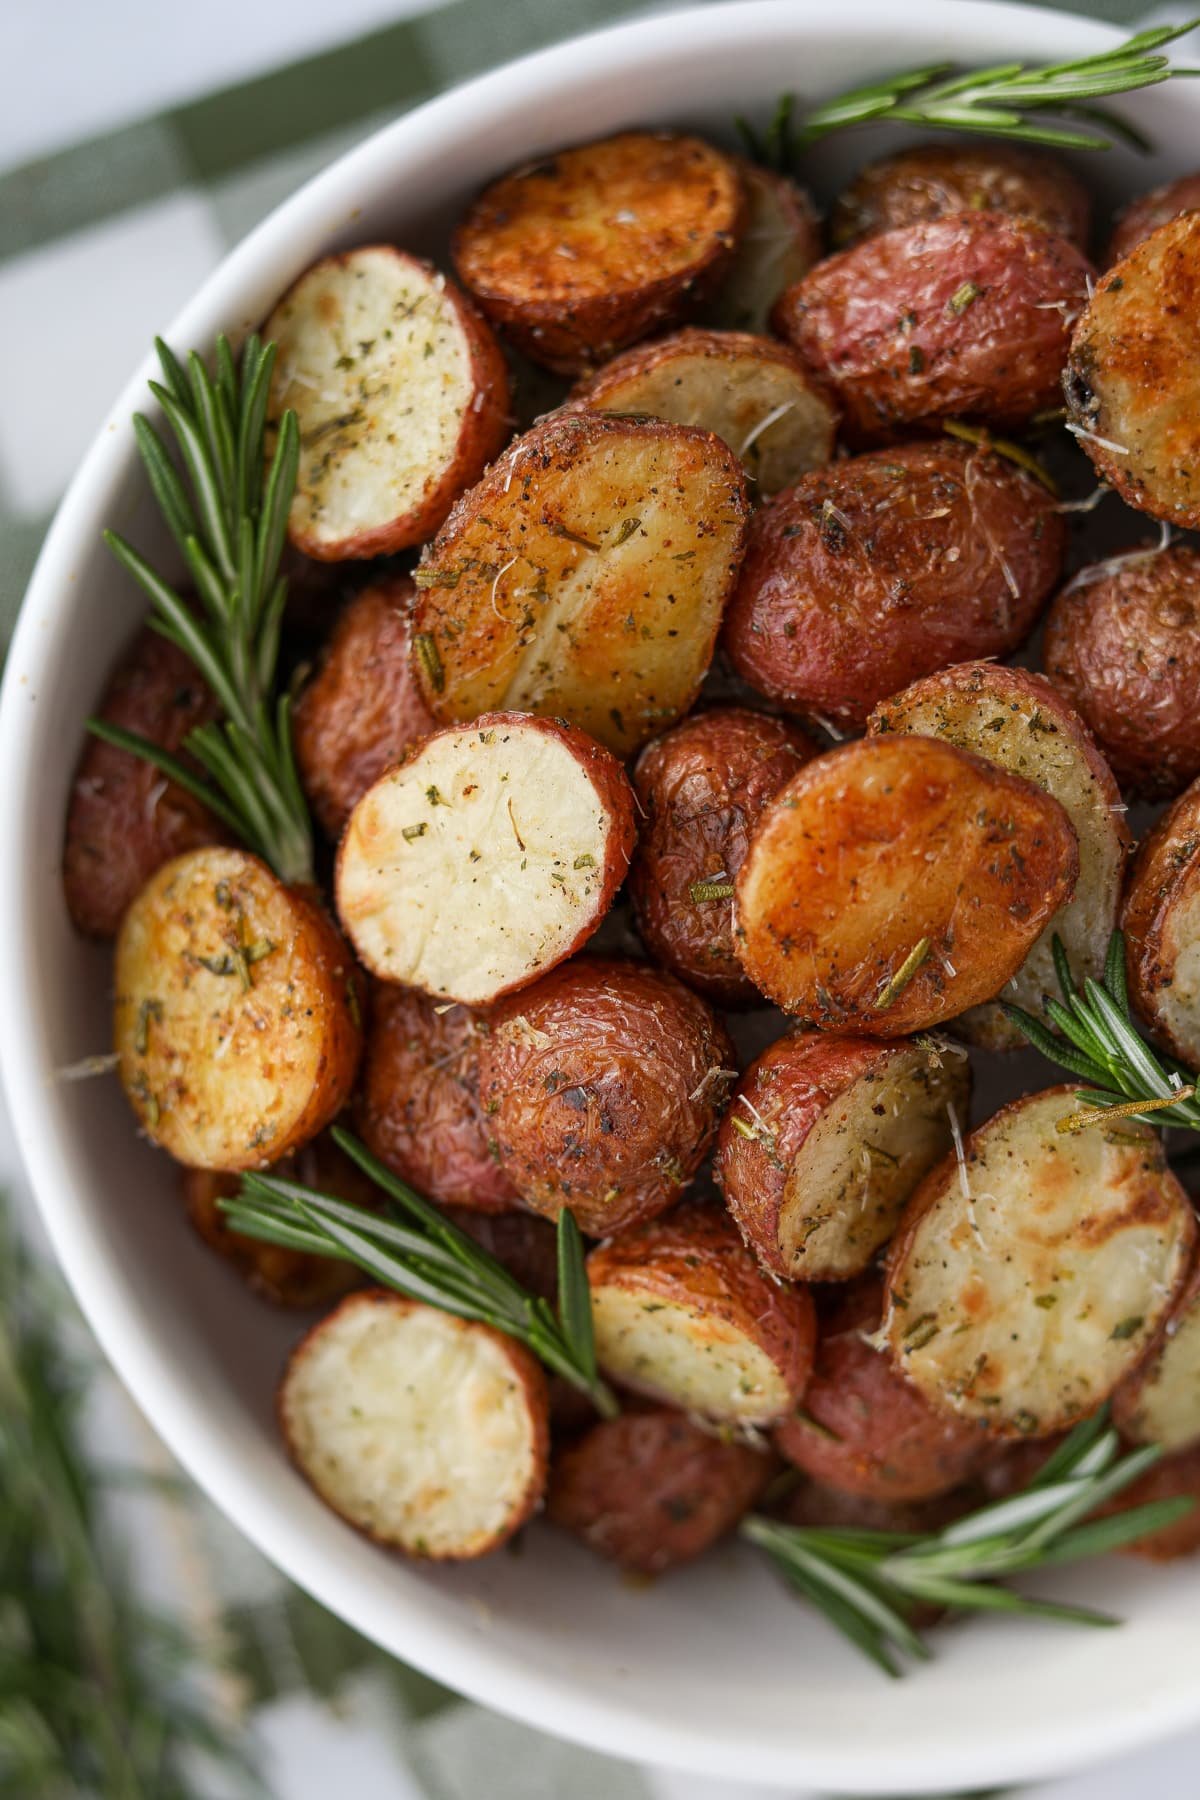 A bowl of halved, roasted baby potatoes garnished with several sprigs of fresh rosemary.